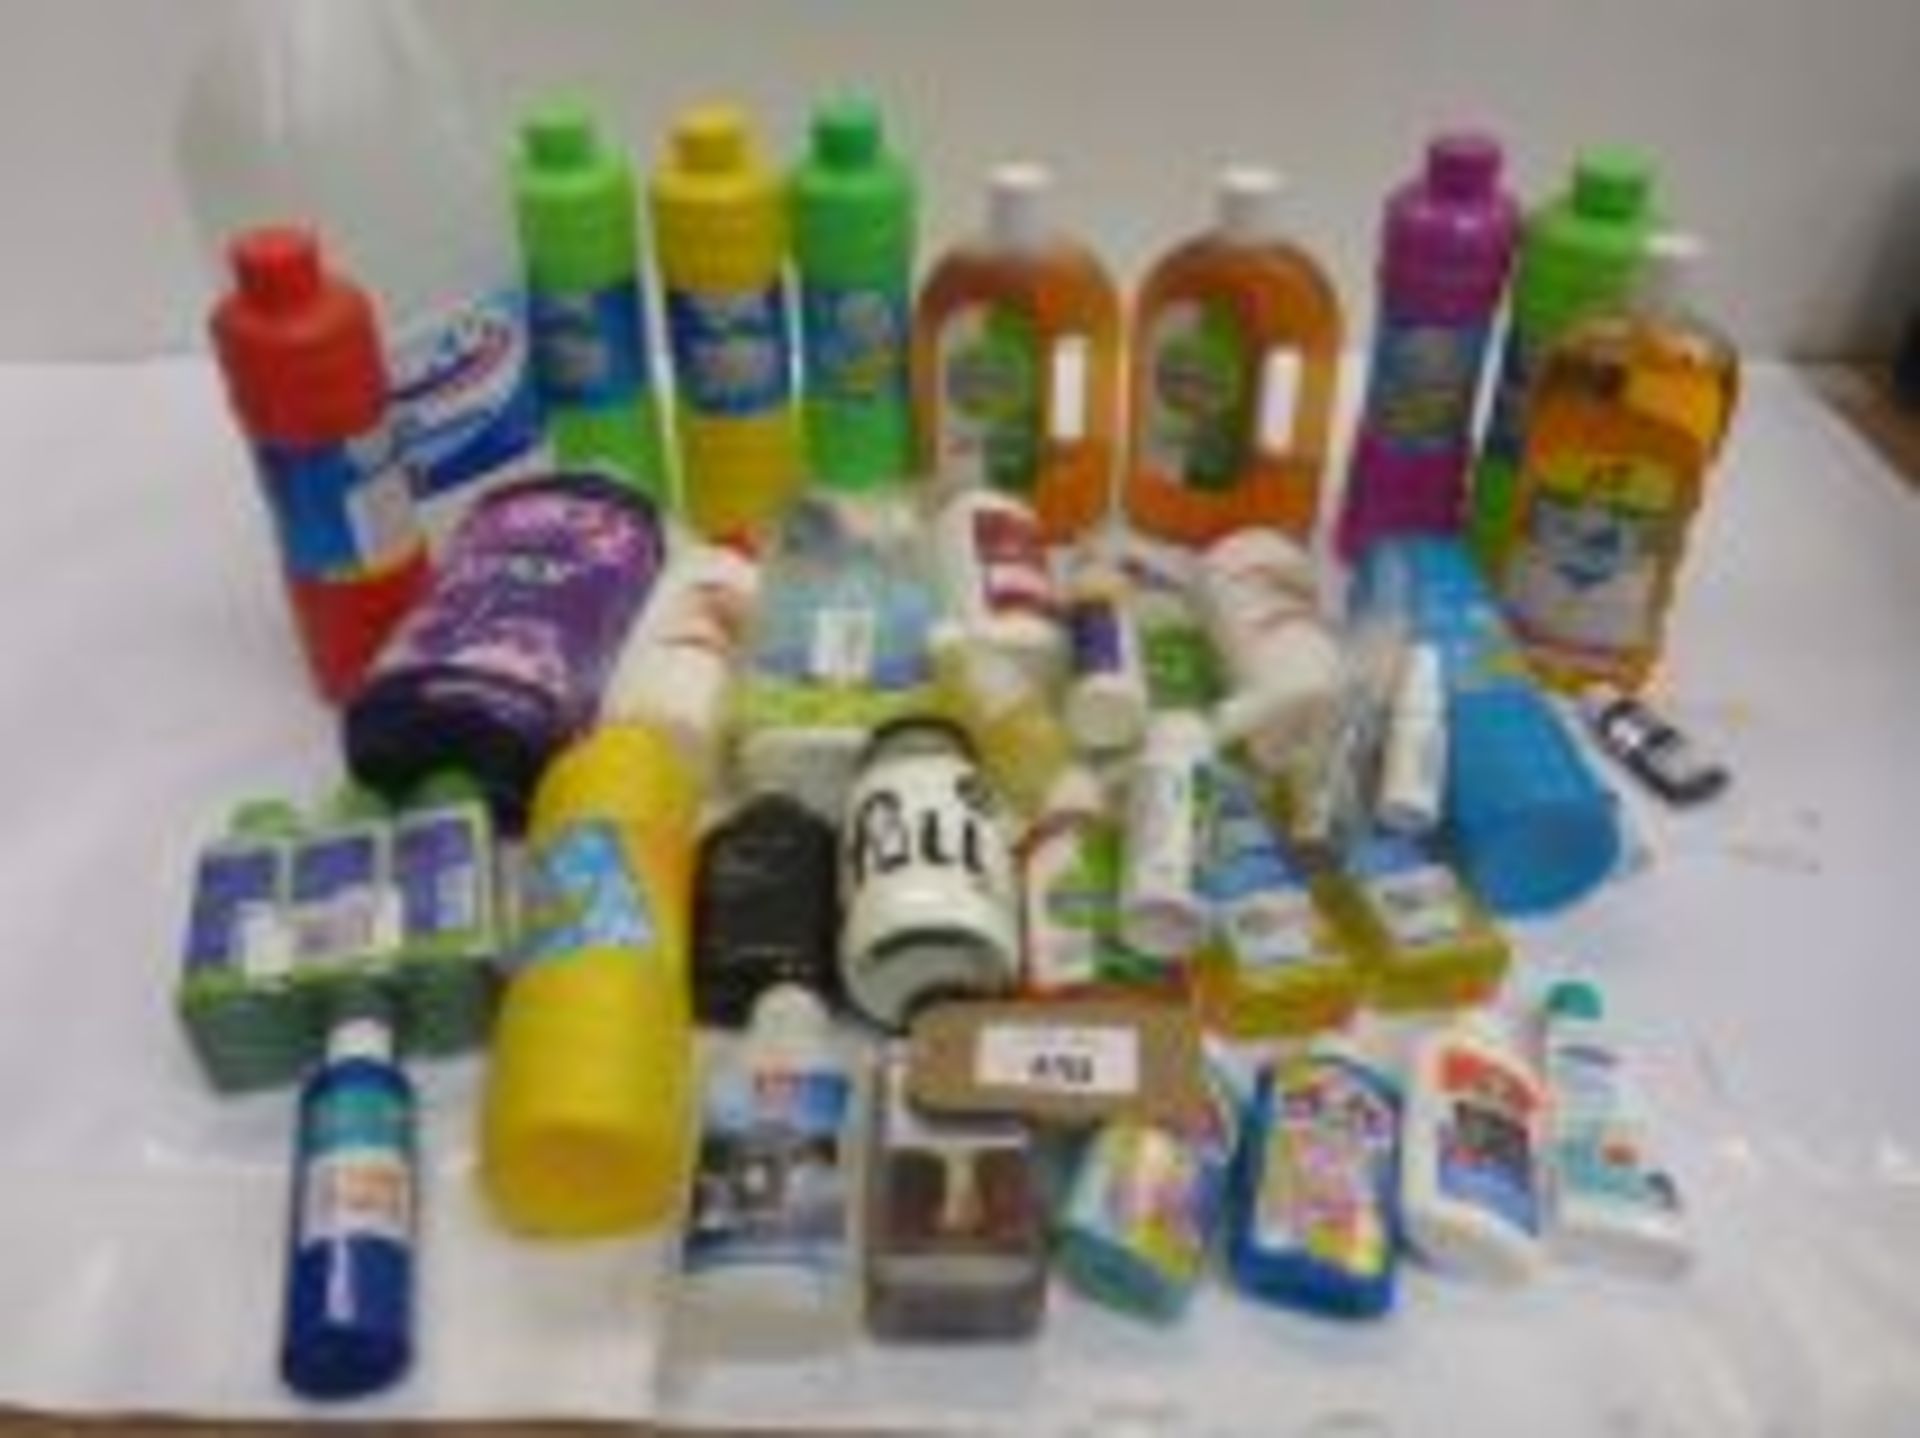 Bag containing household products including Disinfectant, fabric conditioner, PVA glue, bubble